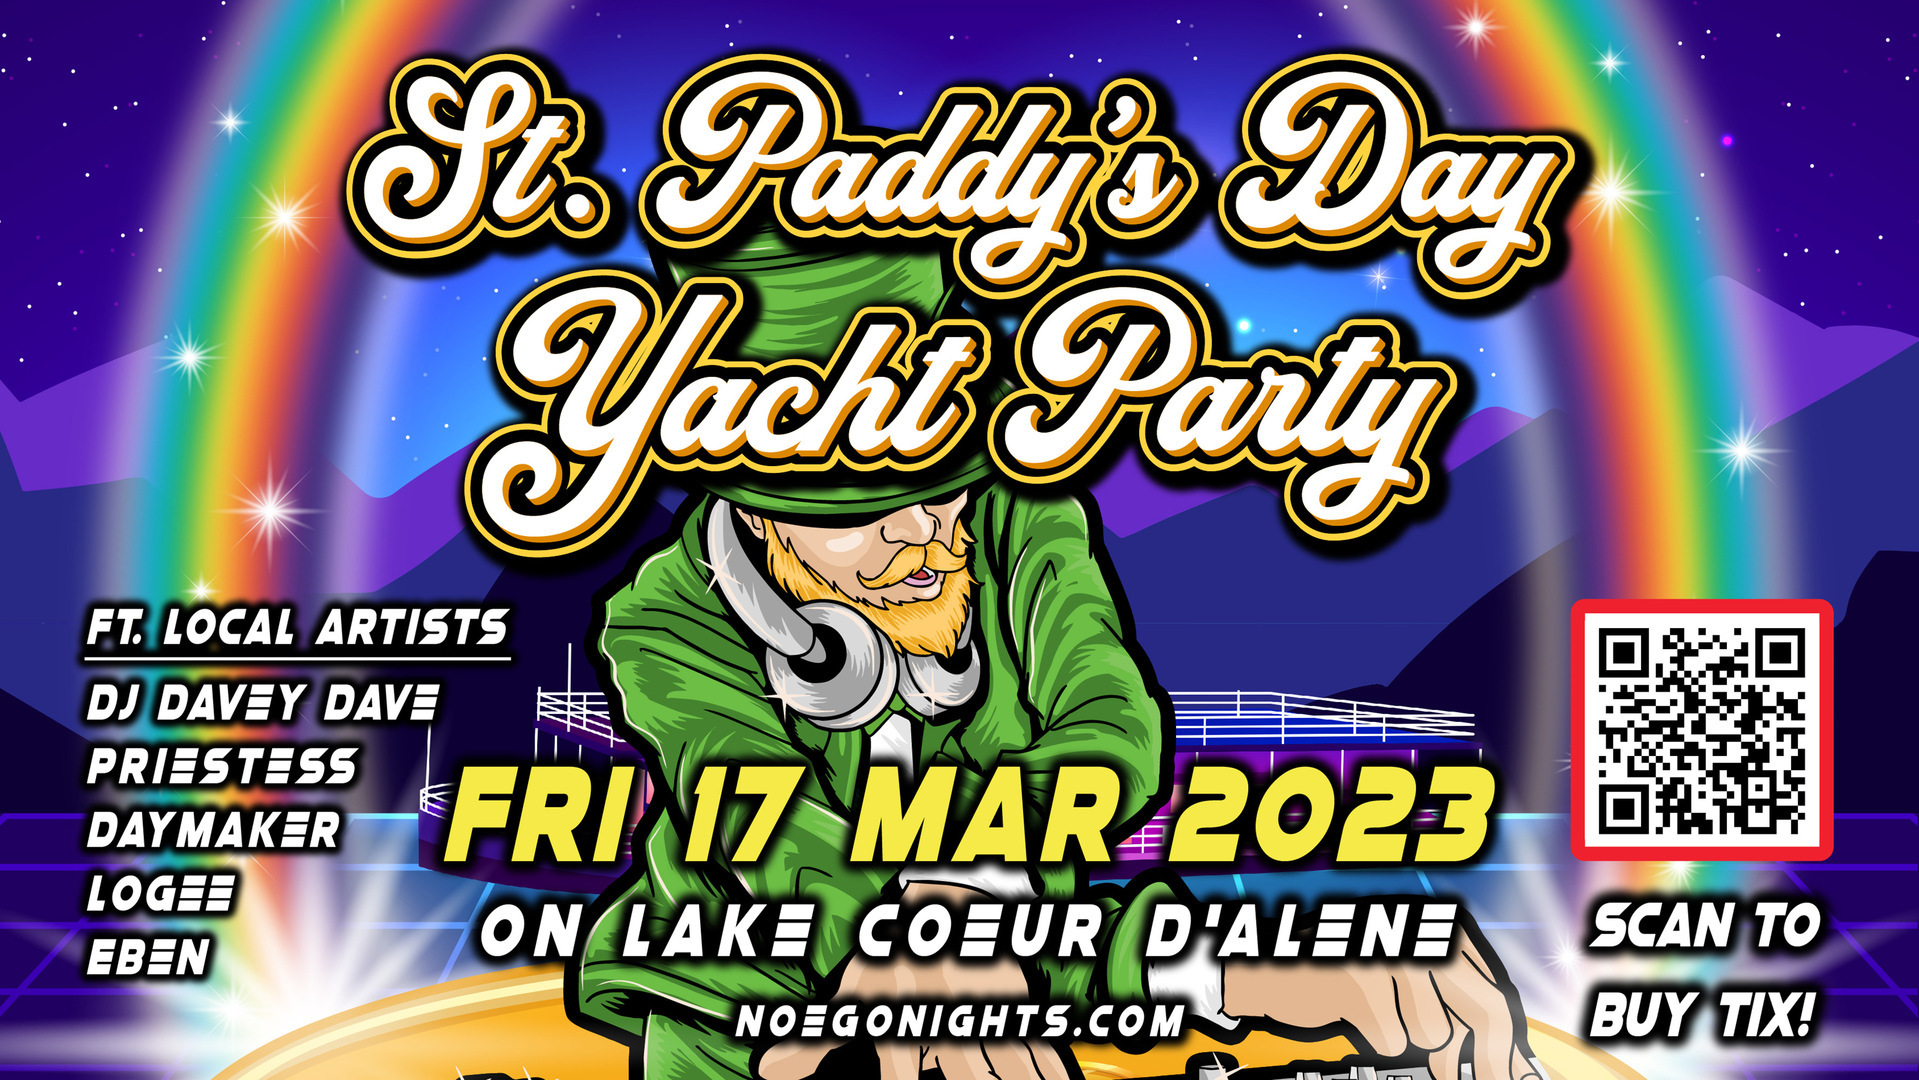 St. Paddy's Day Yacht Party by No Ego Nights, Coeur d'Alene, Idaho, United States